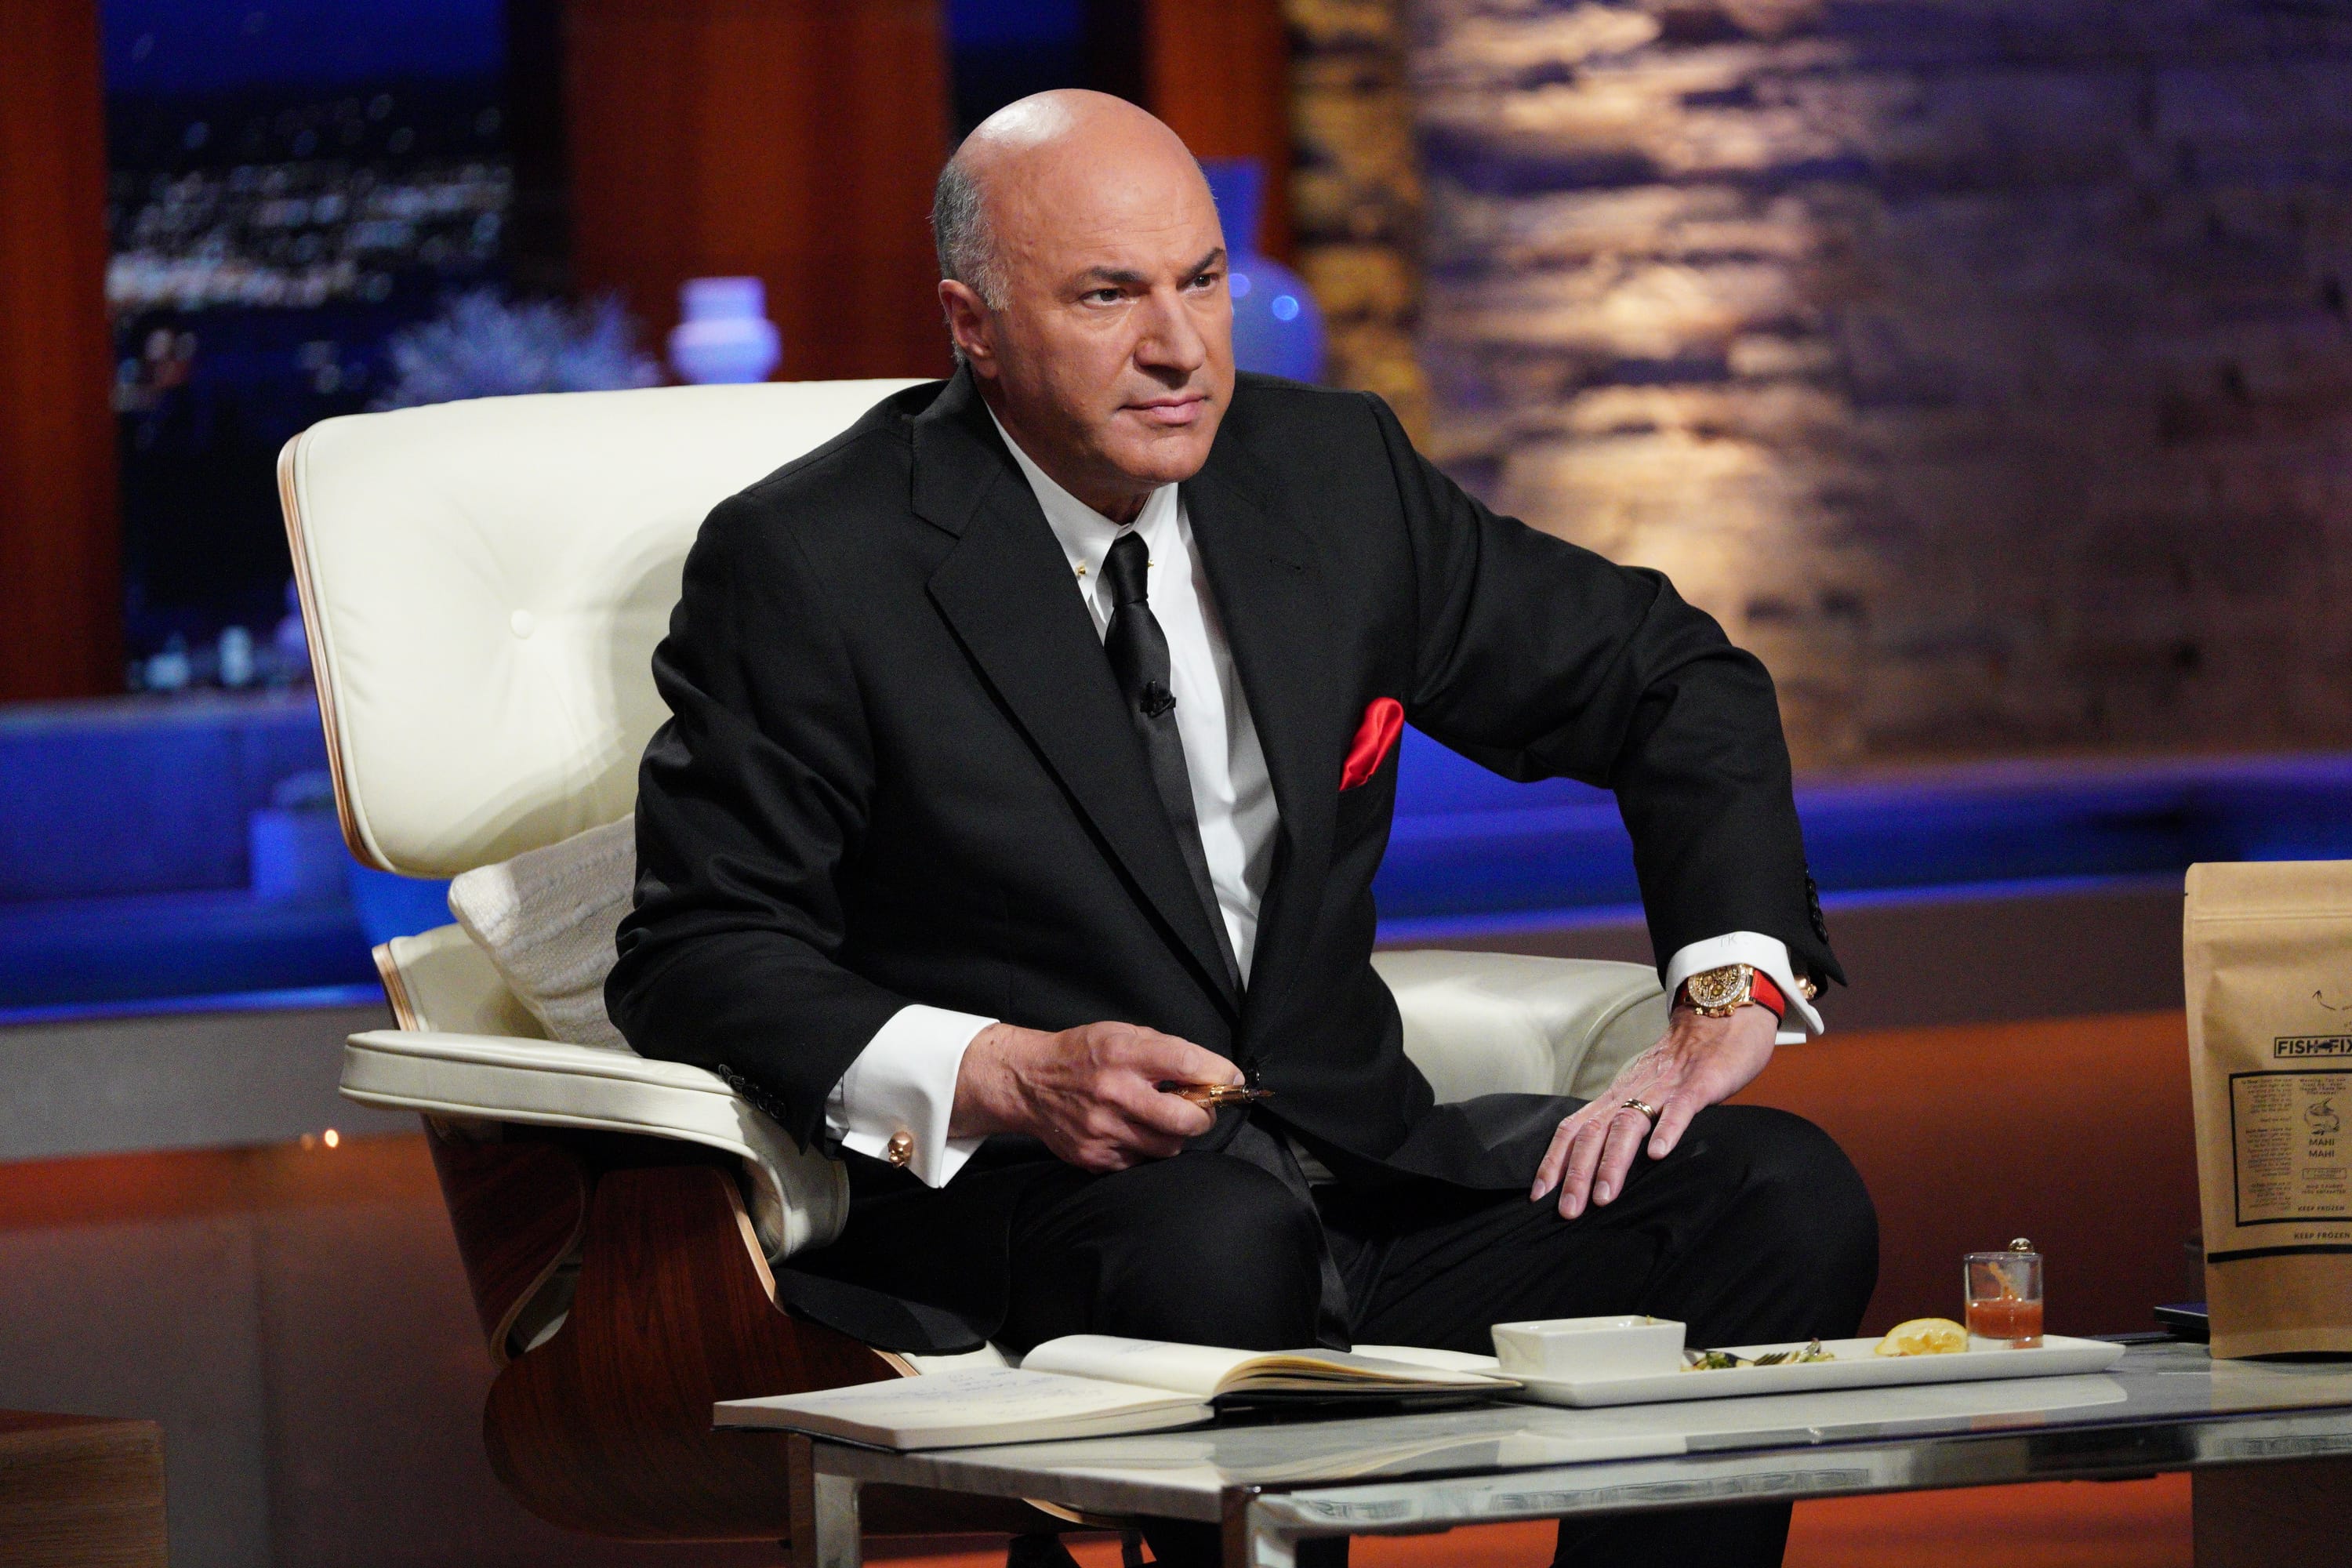 Kevin O'Leary invests in 'Shark Tank' startup after making founder cry